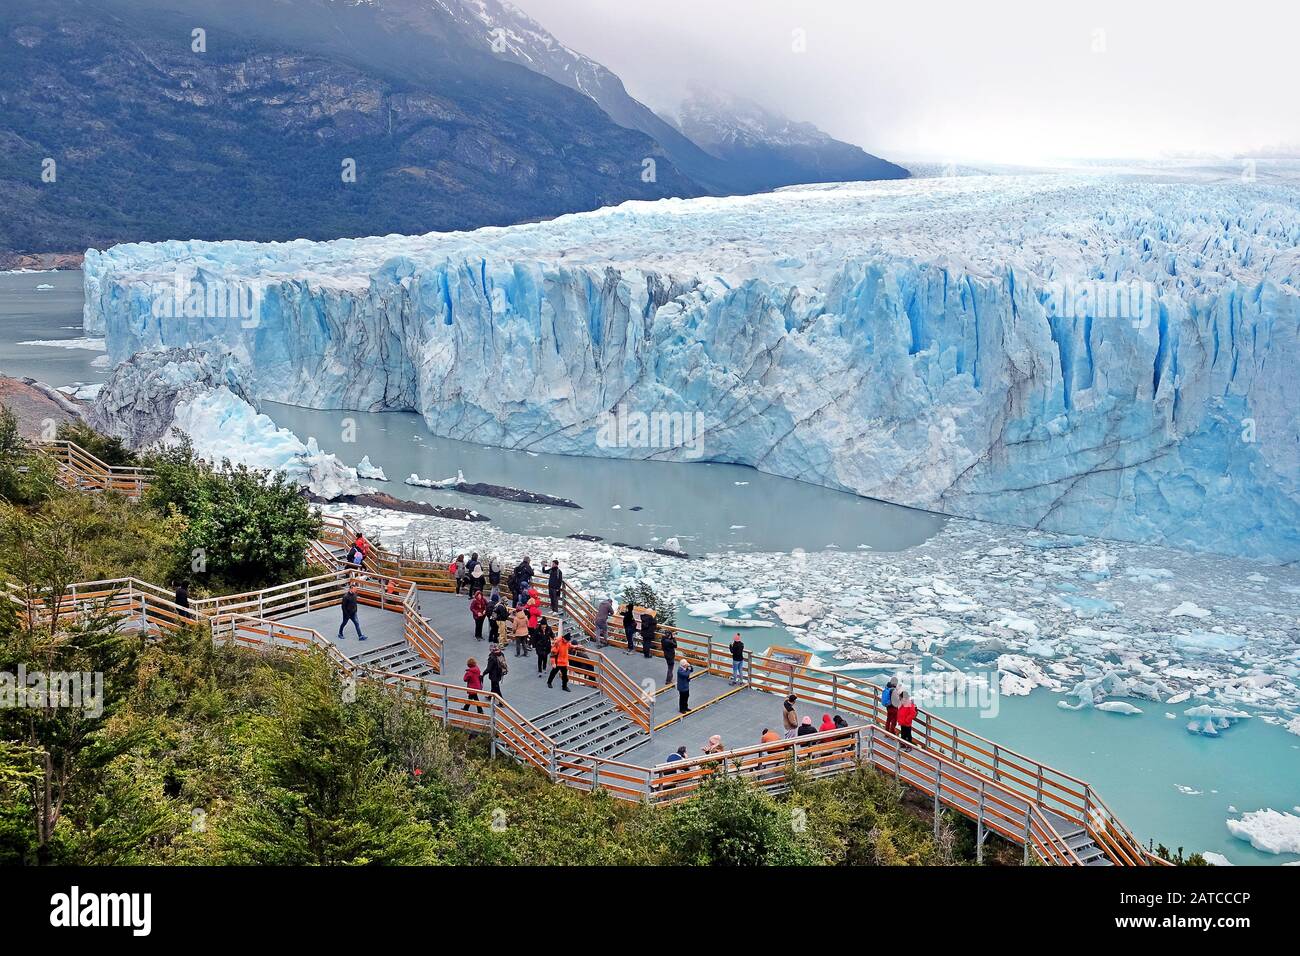 Panoramic view of Perito Moreno Glacier, in El Calafate, Argentina, against a grey and cloudy sky. Stock Photo